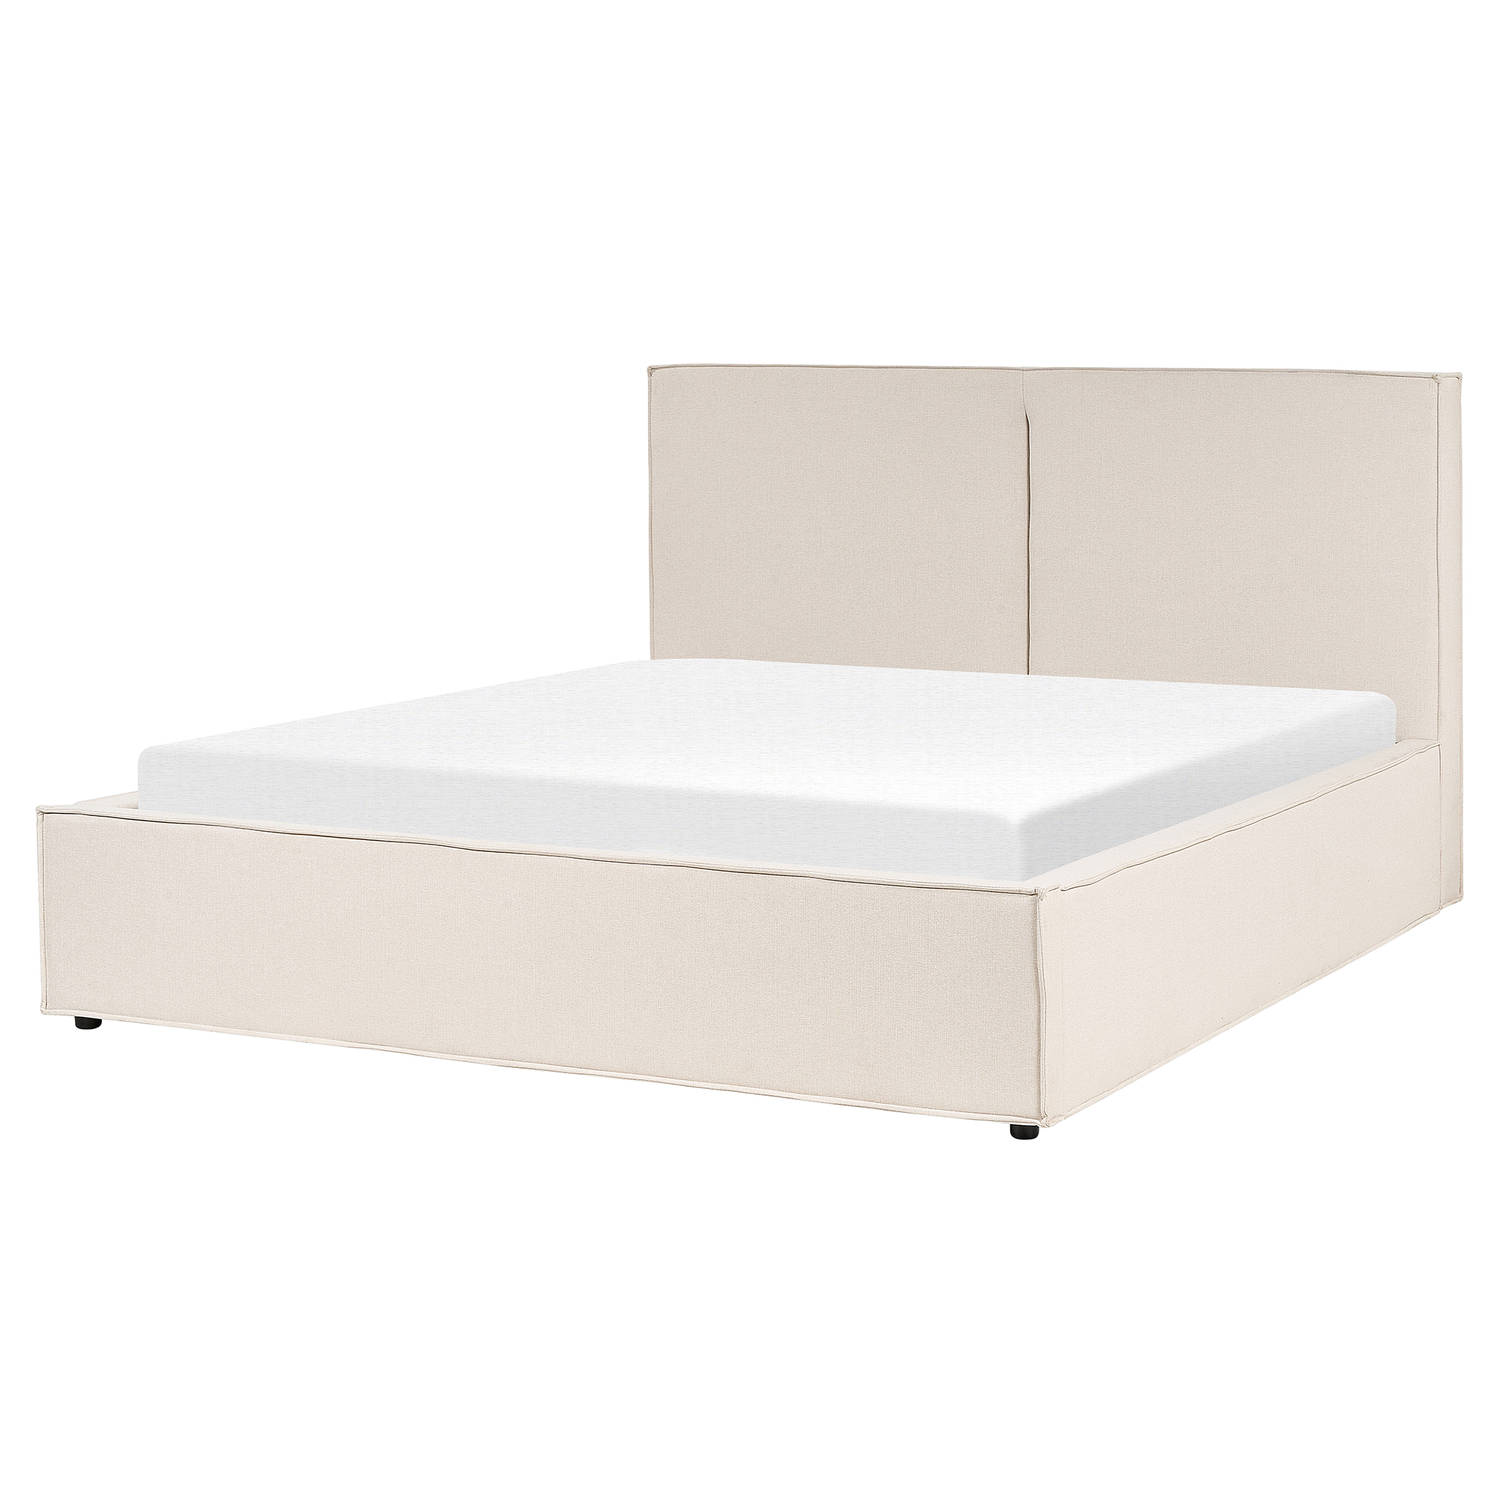 MOISSAC - Bed - Beige - 160 x 200 cm - Polyester